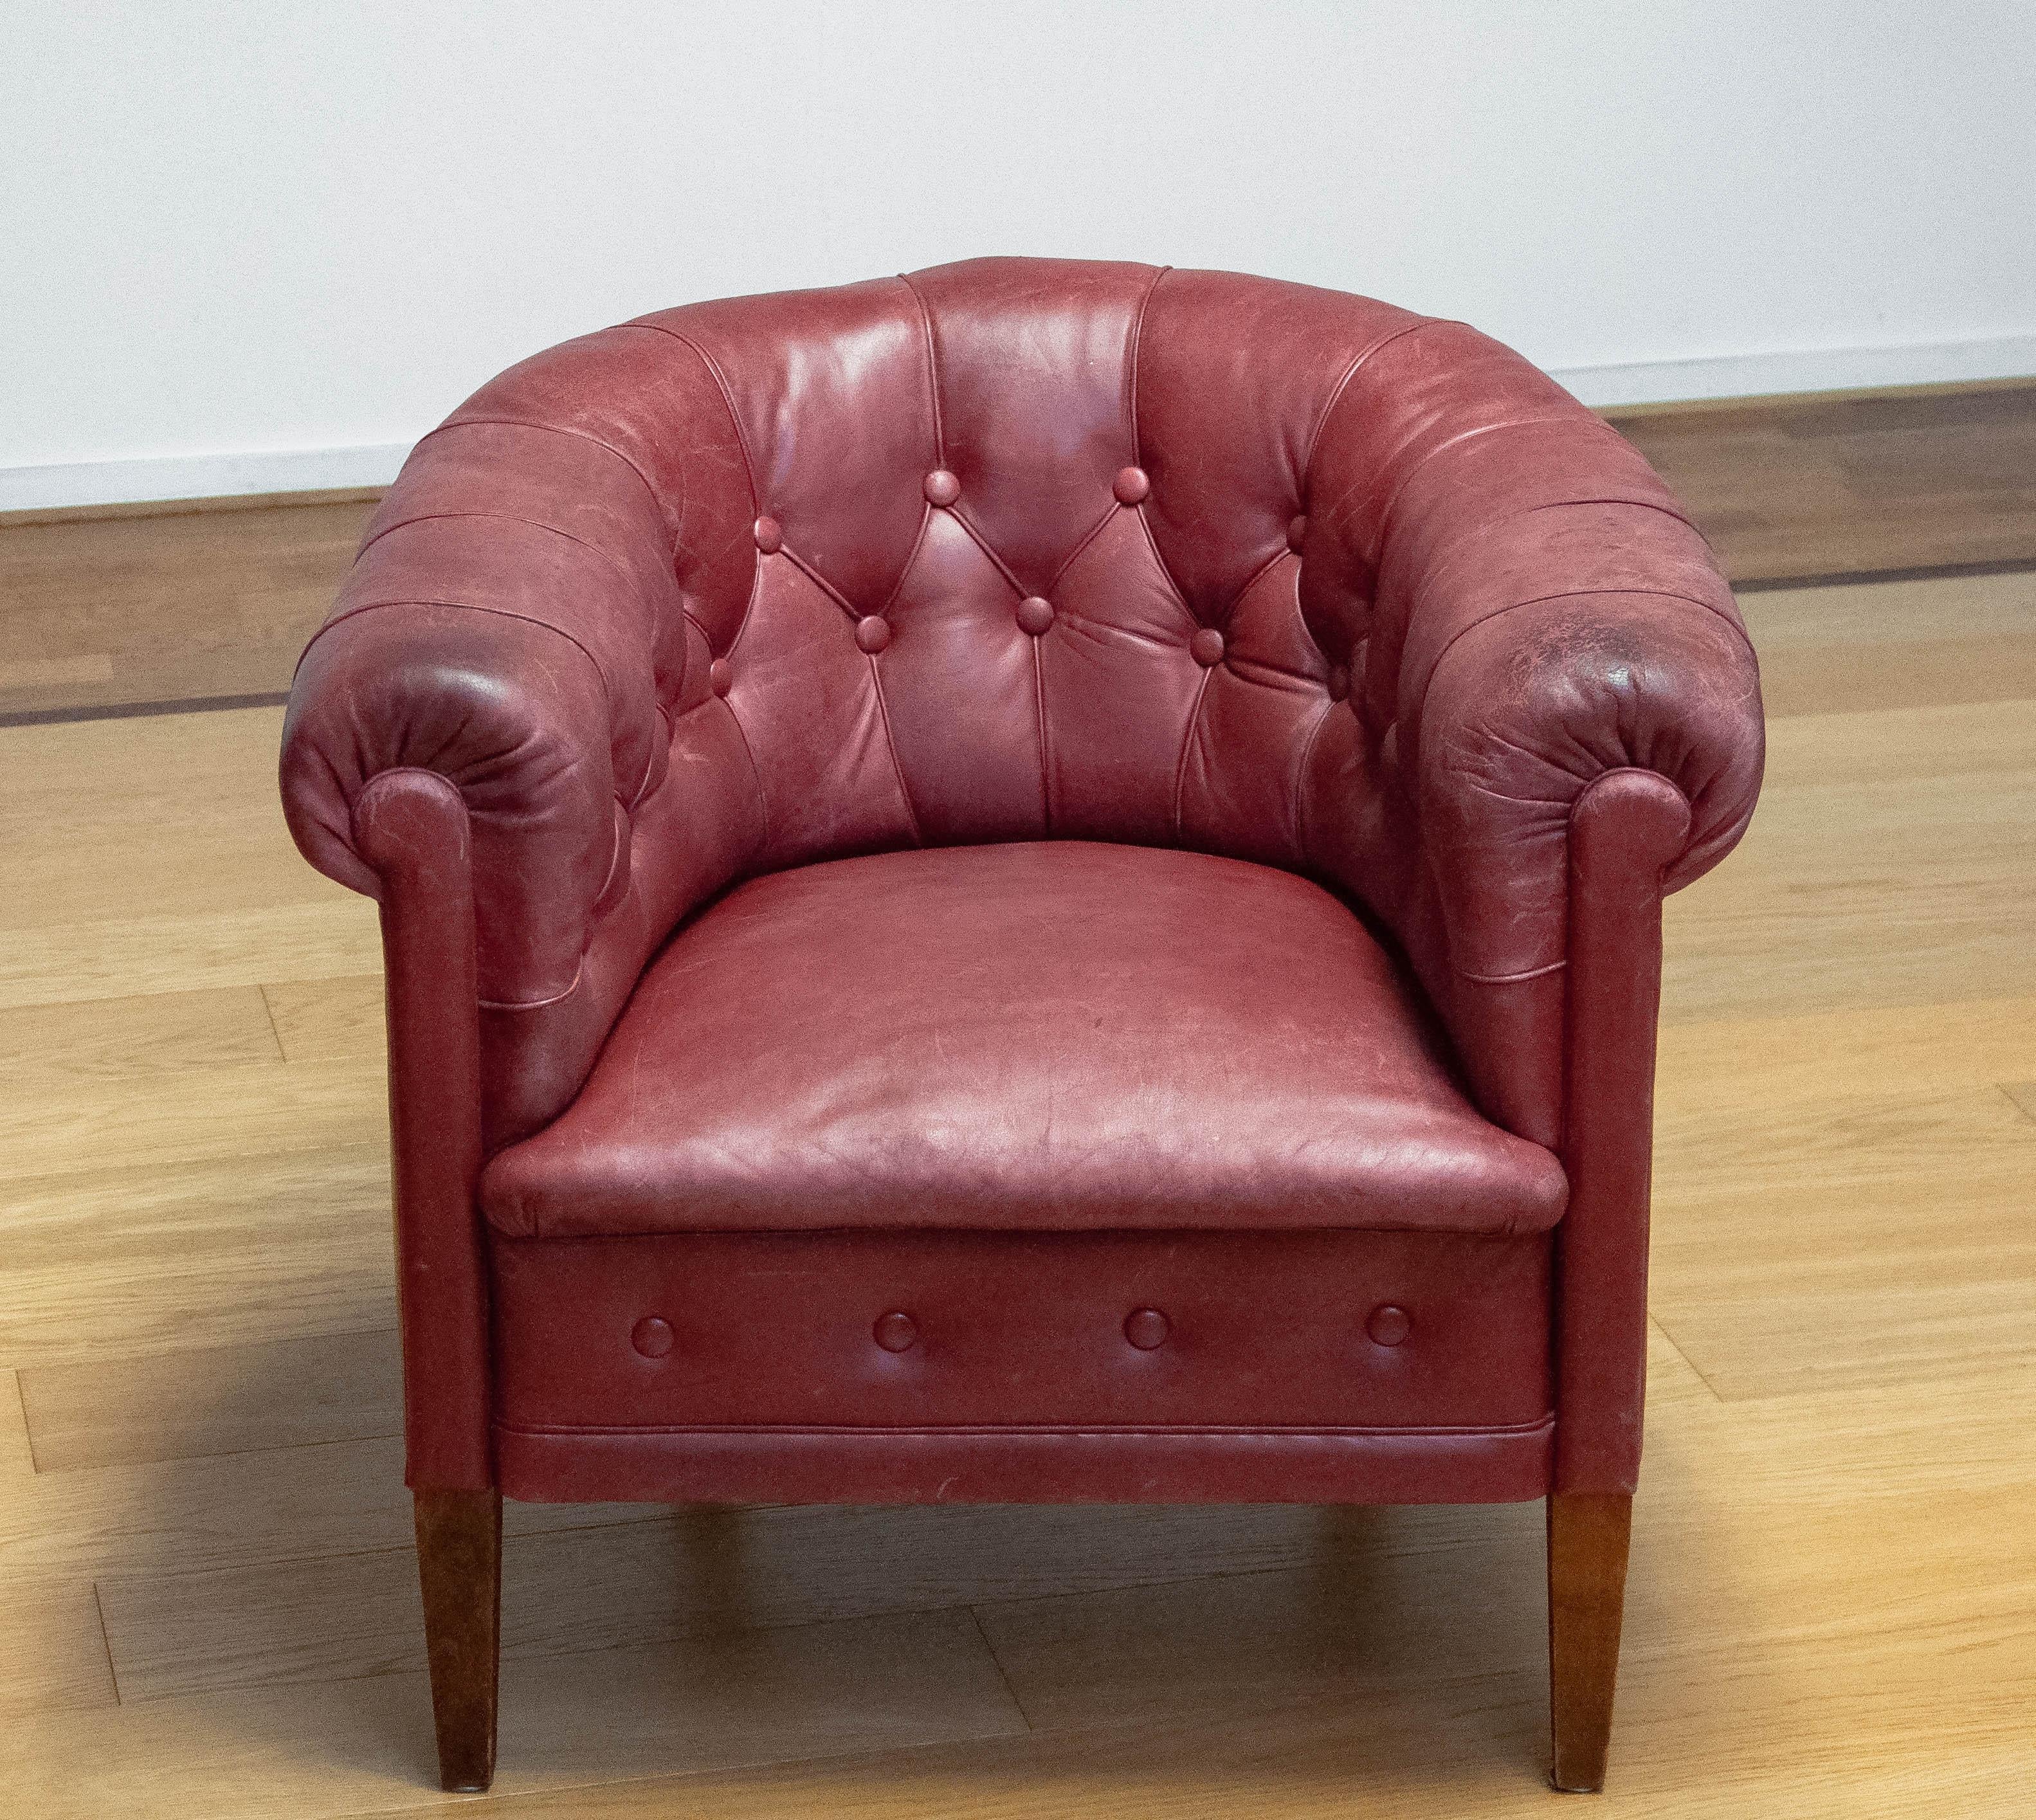 1930s Swedish Crimson Red Chesterfield Club / Lounge Chair in Patinated Leather For Sale 6